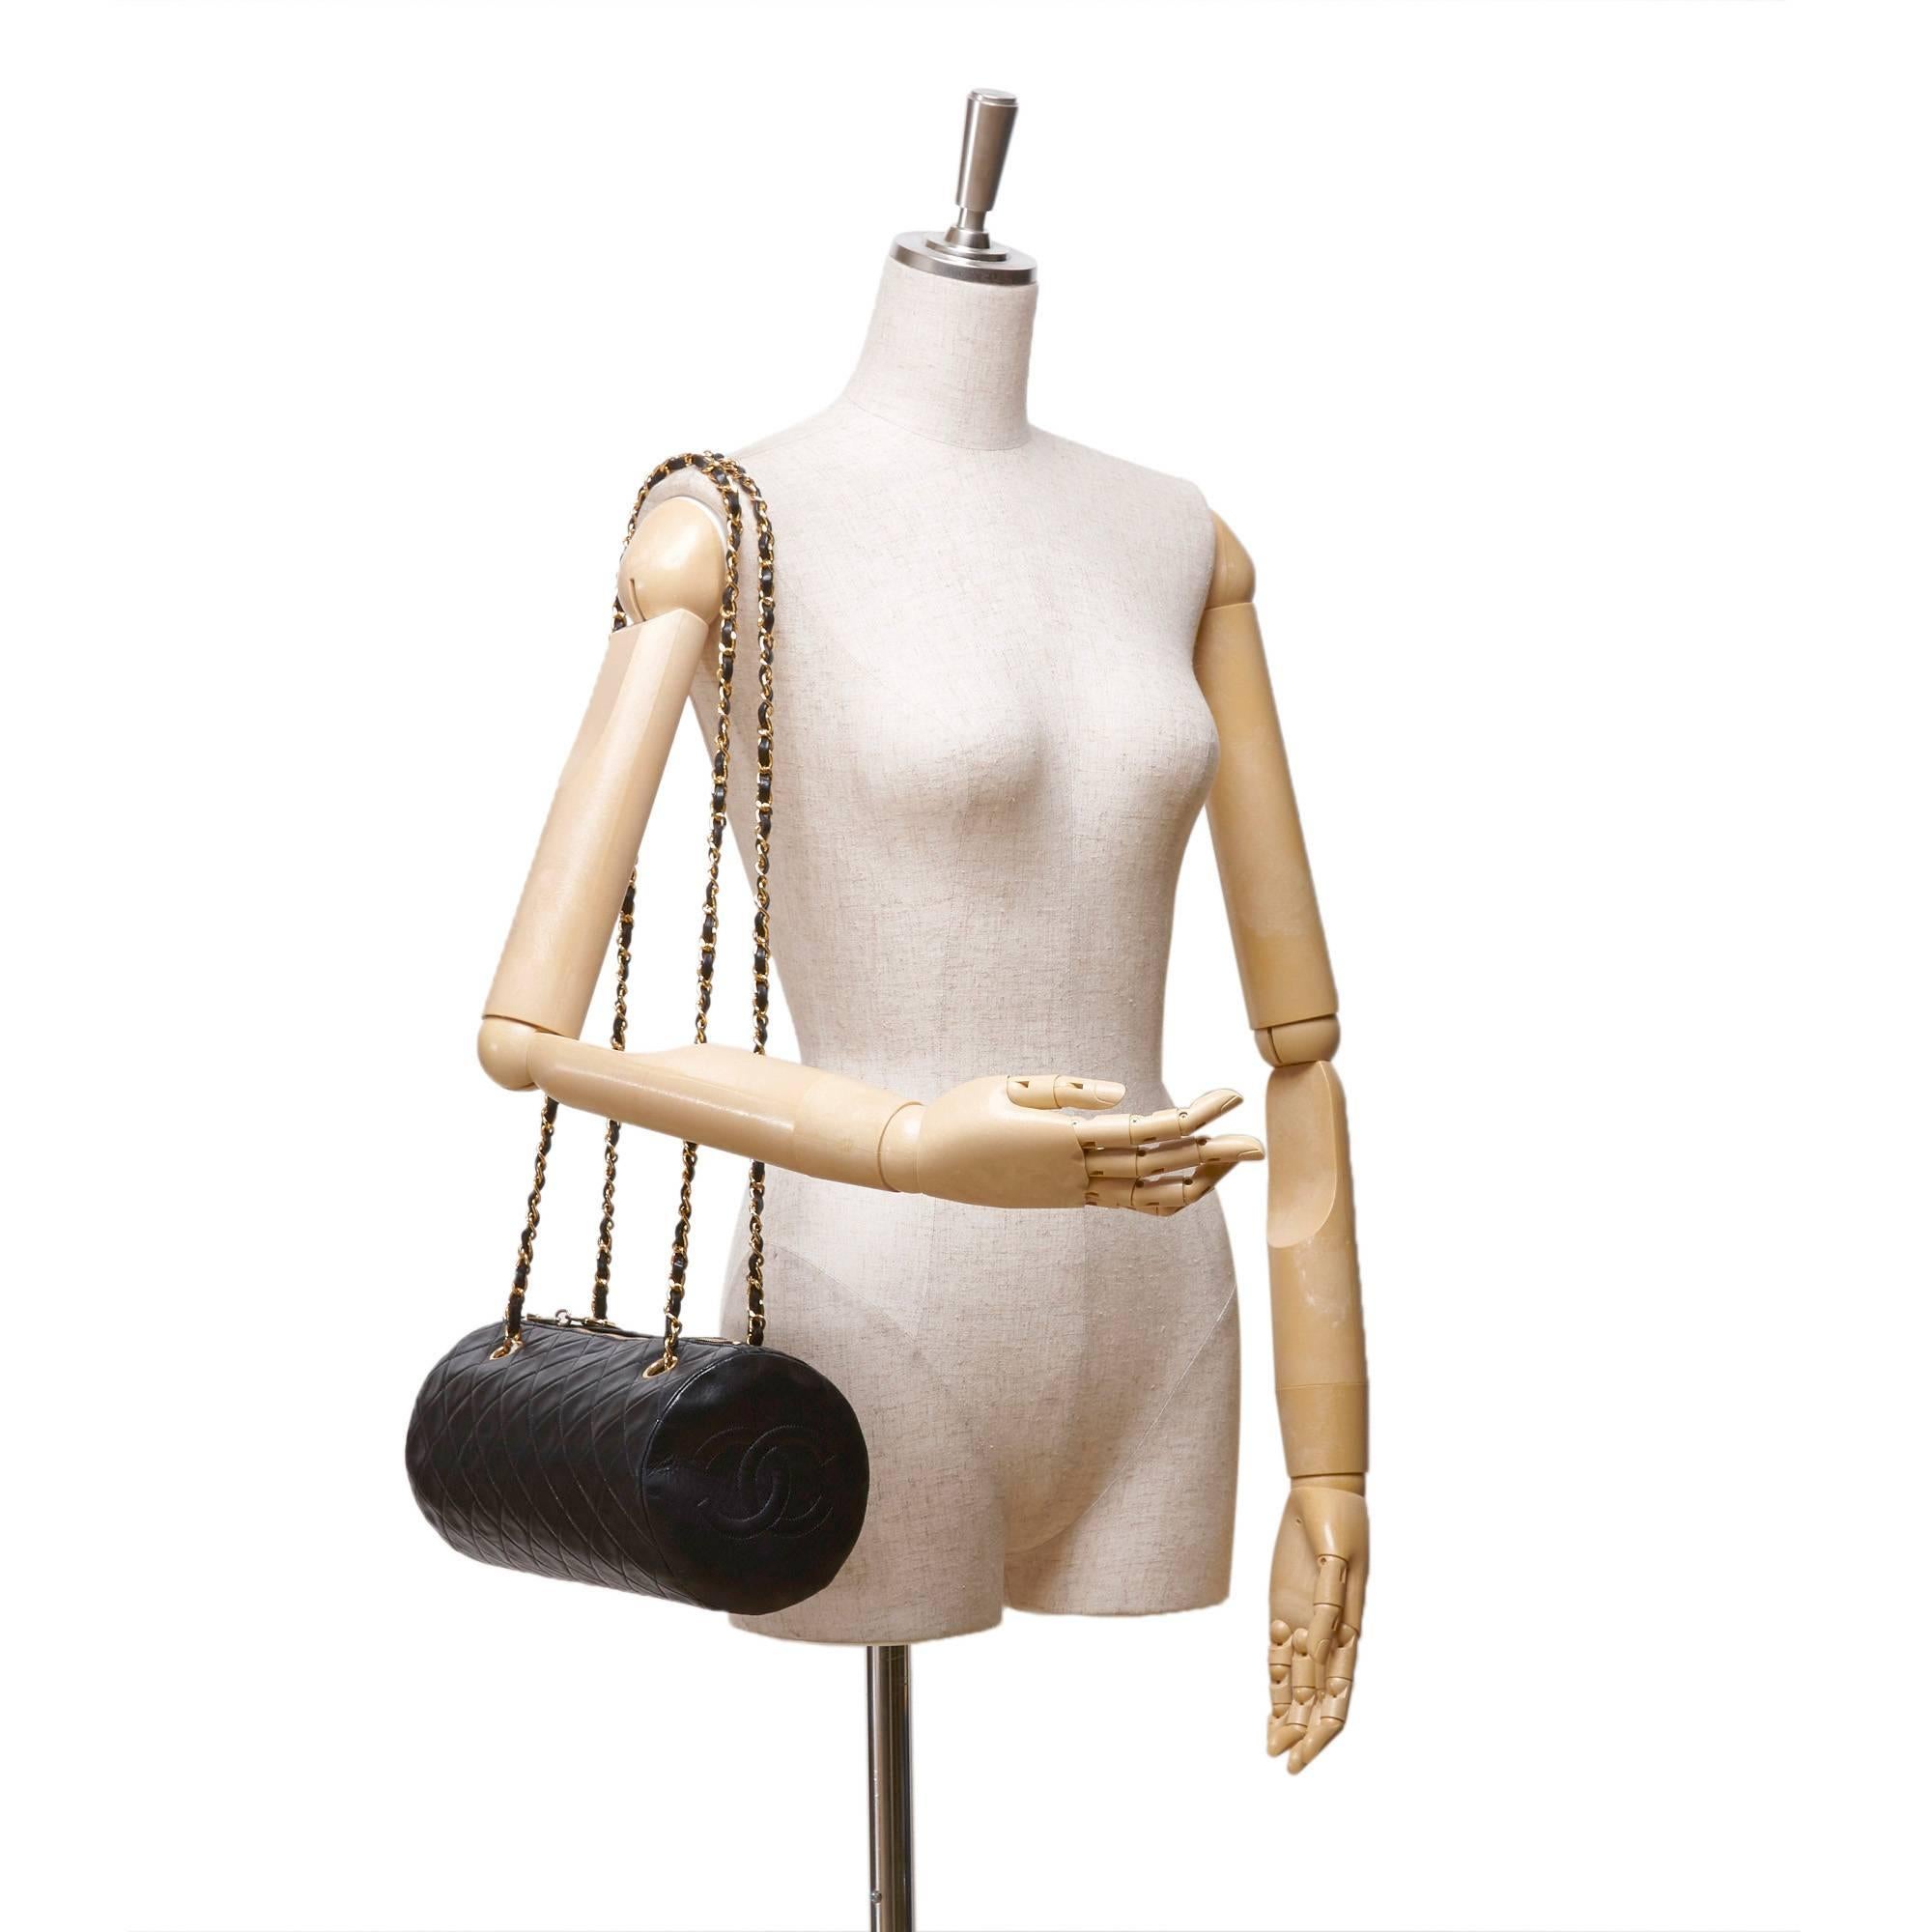 - This Chanel cylinder shoulder bag features a black quilted lambskin leather body, gold-tone chains, interior zipper pocket and top zip closure. 

- Made in France. 

- Size: 14cm x 26cm x 5cm. Shoulder Drop: 101cm. 

- Serial no: 1614458. 

-